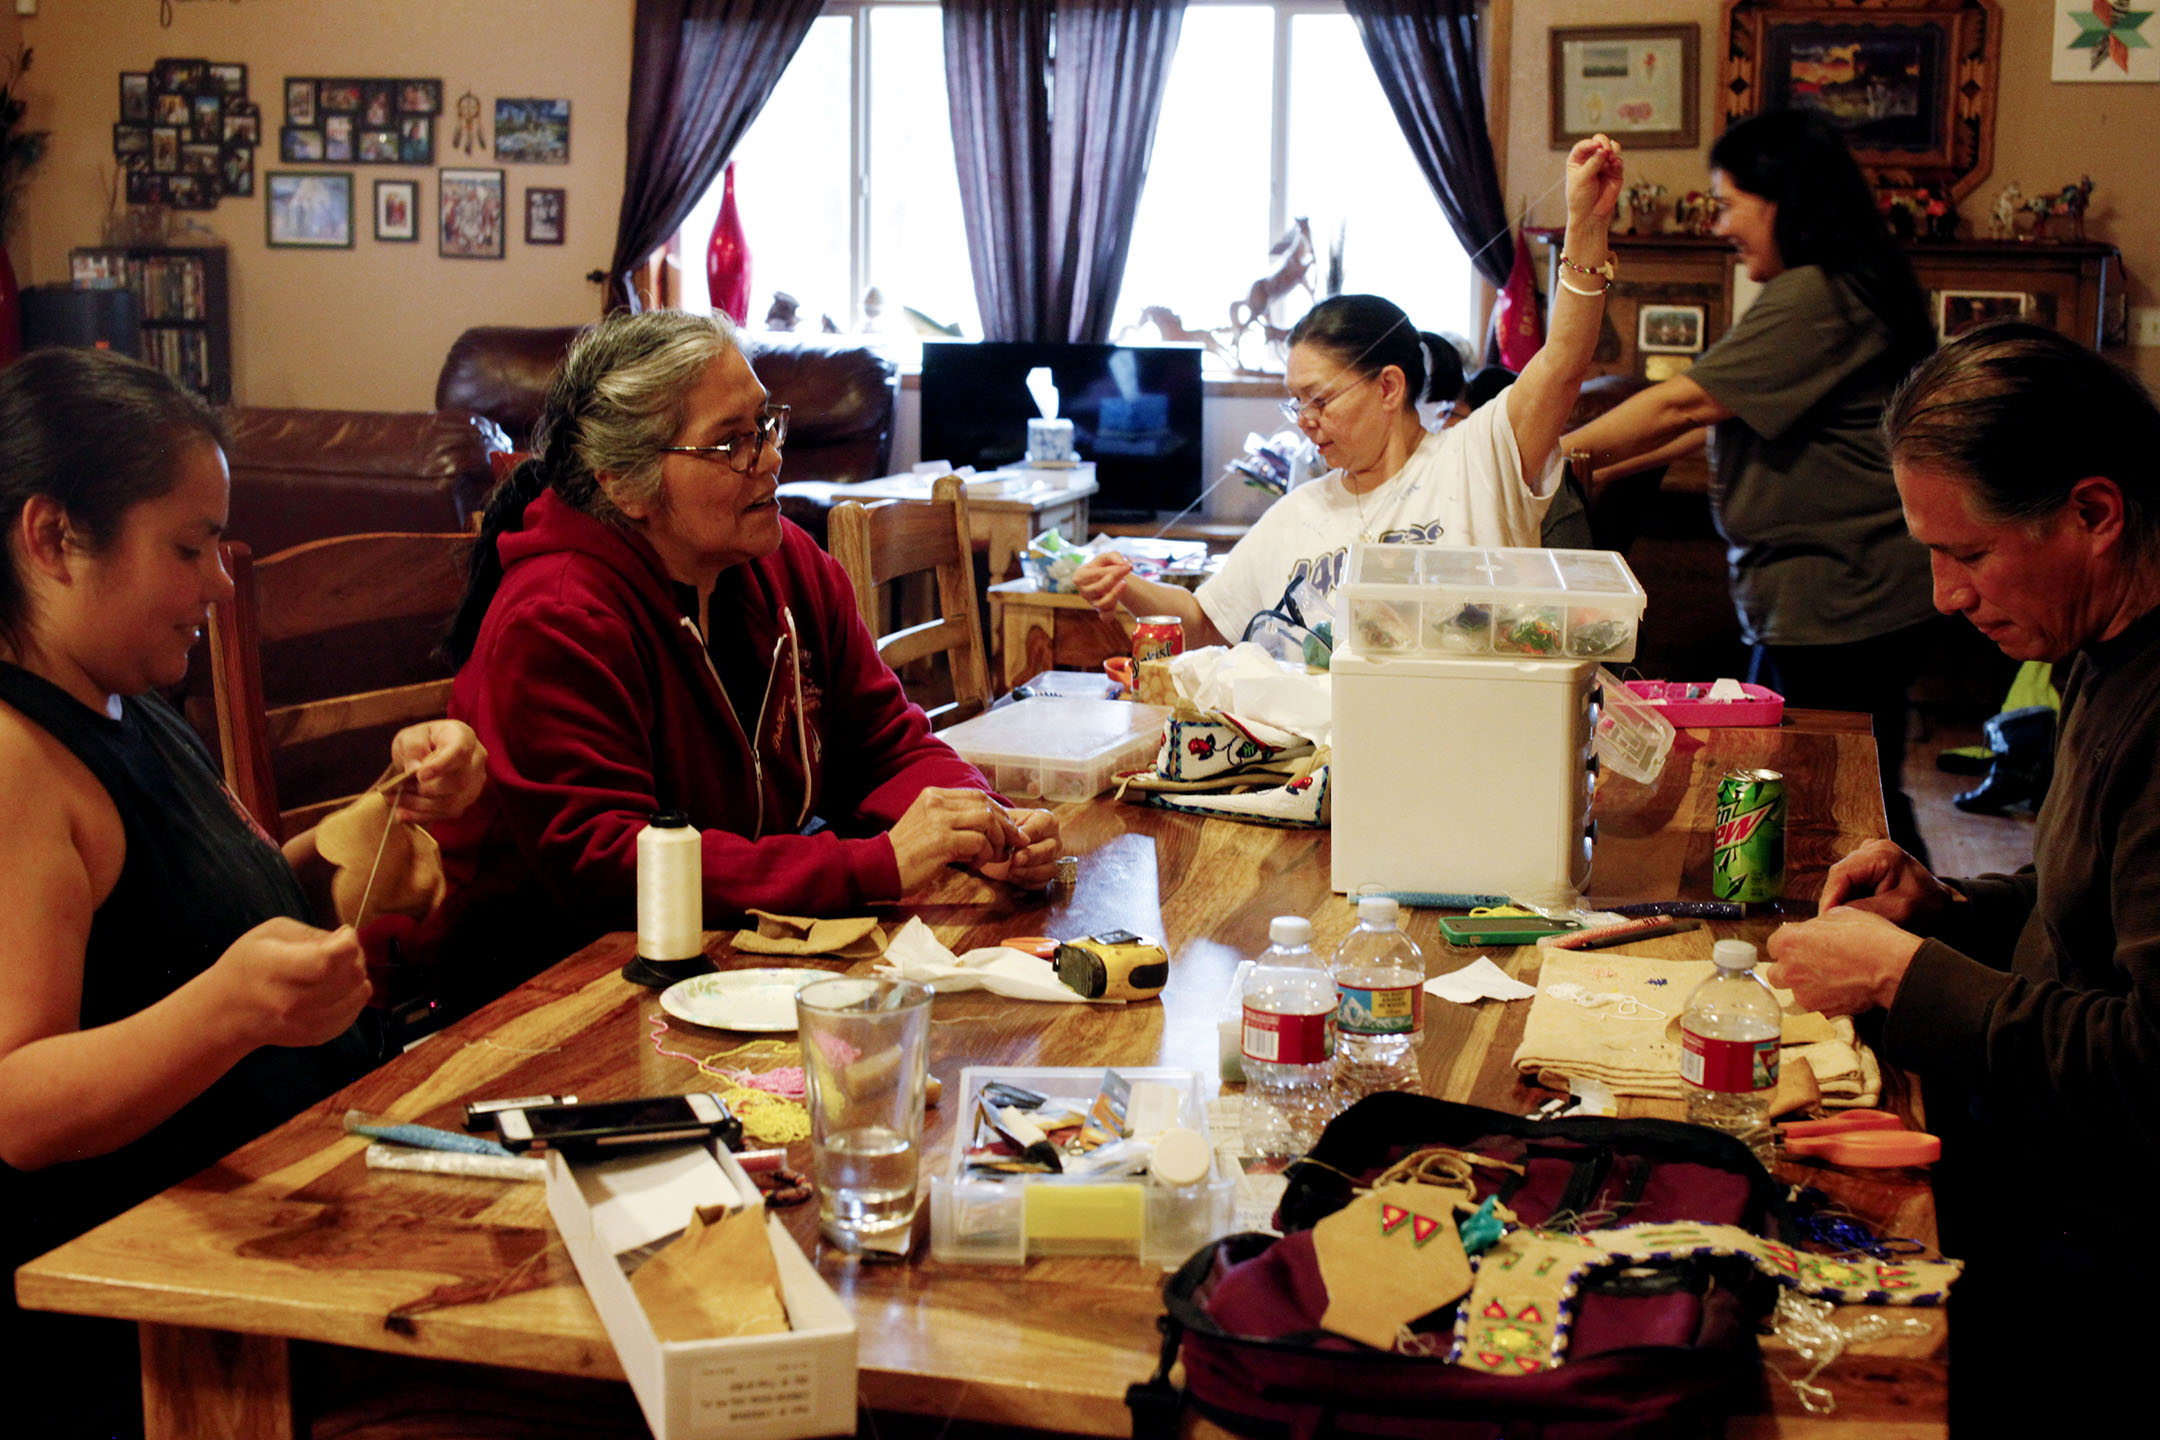 Flathead community members gather to socialize and make moccasins at Patty Stevens’ home. Stevens, describes her home as a safe haven. “I think you can heal or be well if you’re just doing things that are part of your culture and being around other people that are happy,” Stevens said.